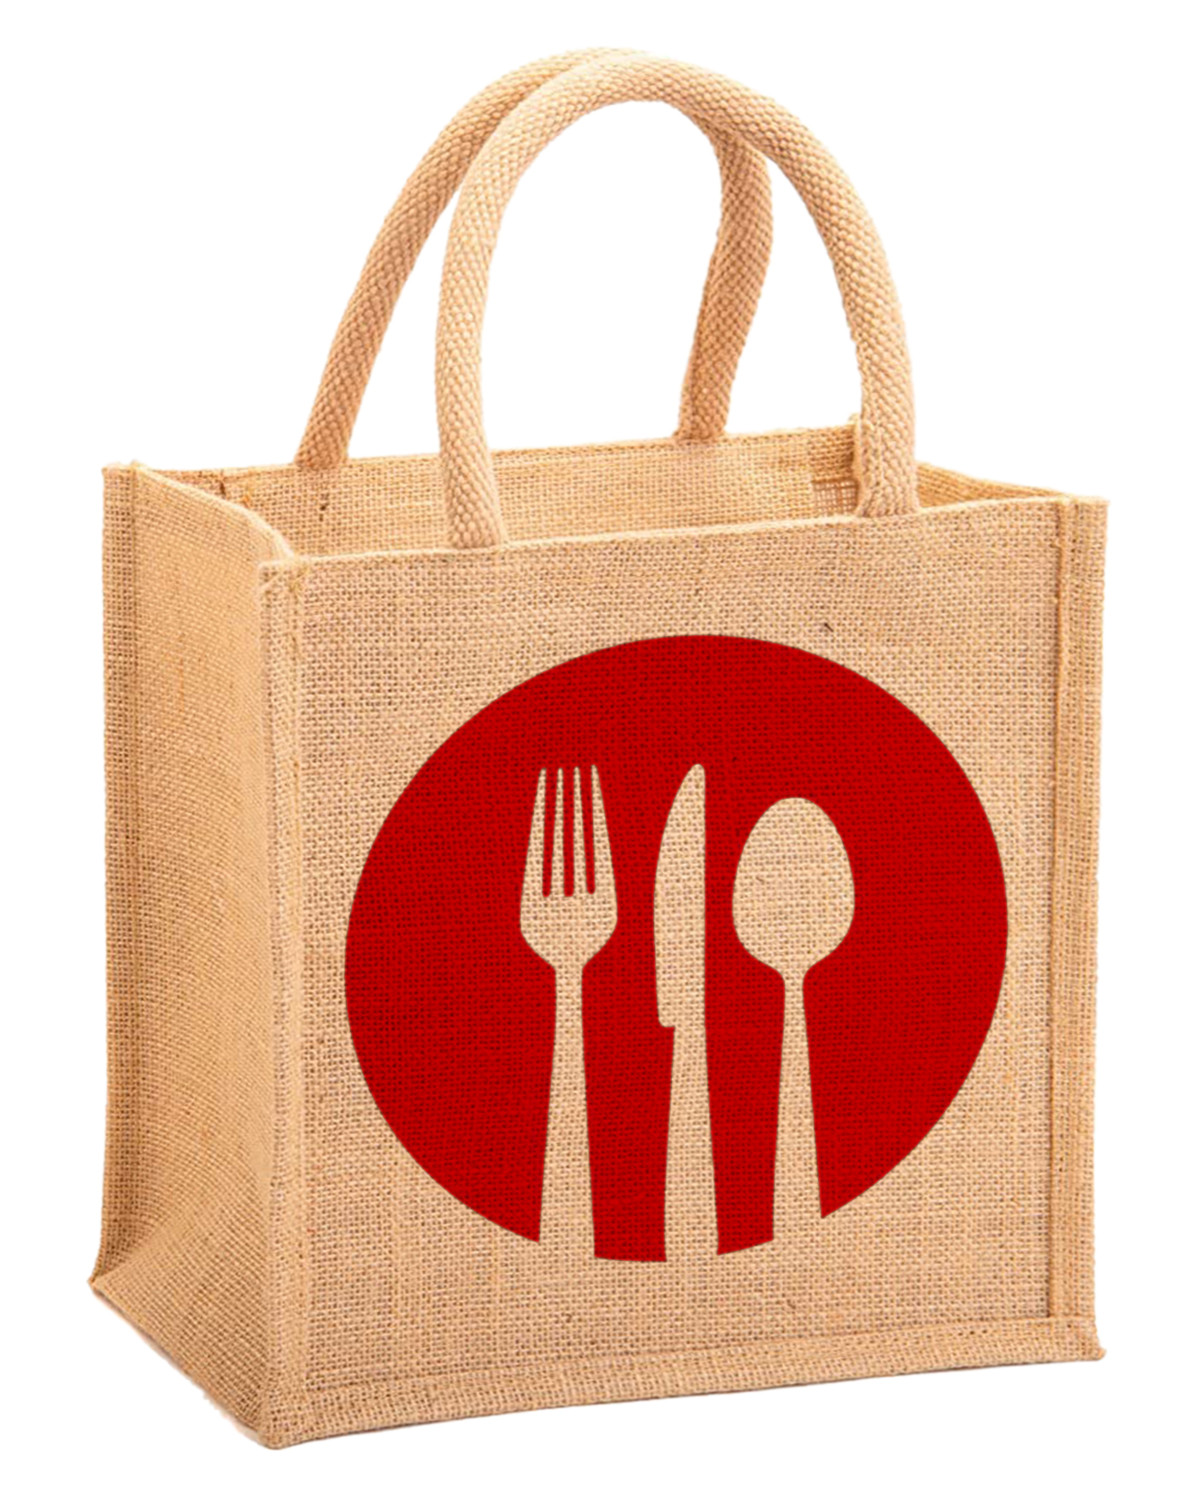 Kuber Industries Fork Knife Print Jute Reusable Eco-Friendly Hand Bag/Grocery Bag For Man, Woman With Handle Pack Of 2 (Black and Red) 54KM4359